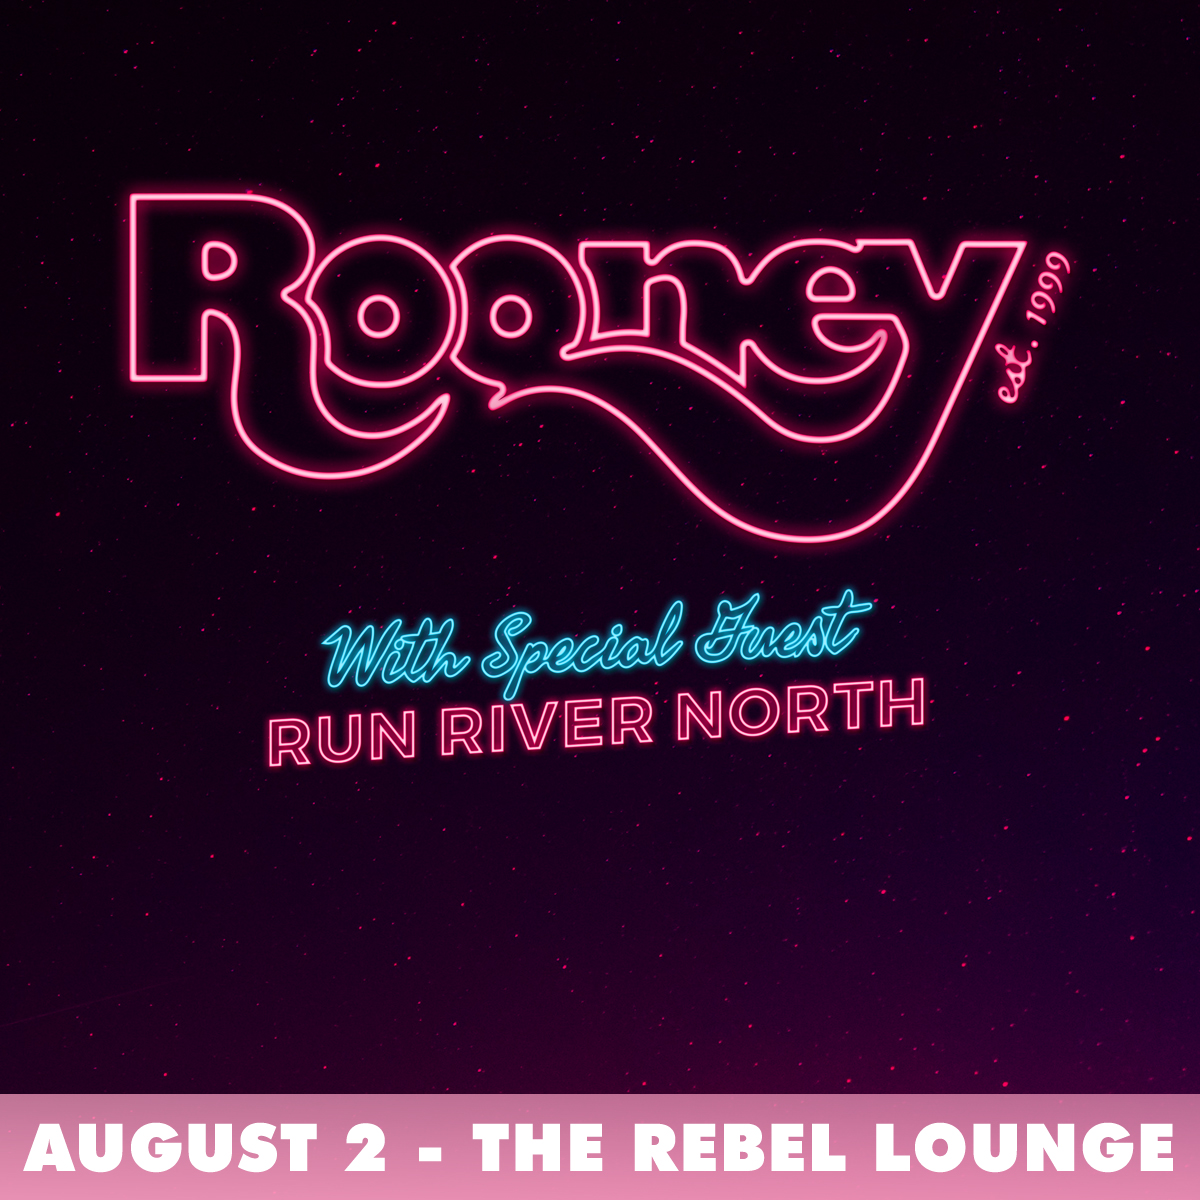 Win tickets to ROONEY live at The Rebel Lounge